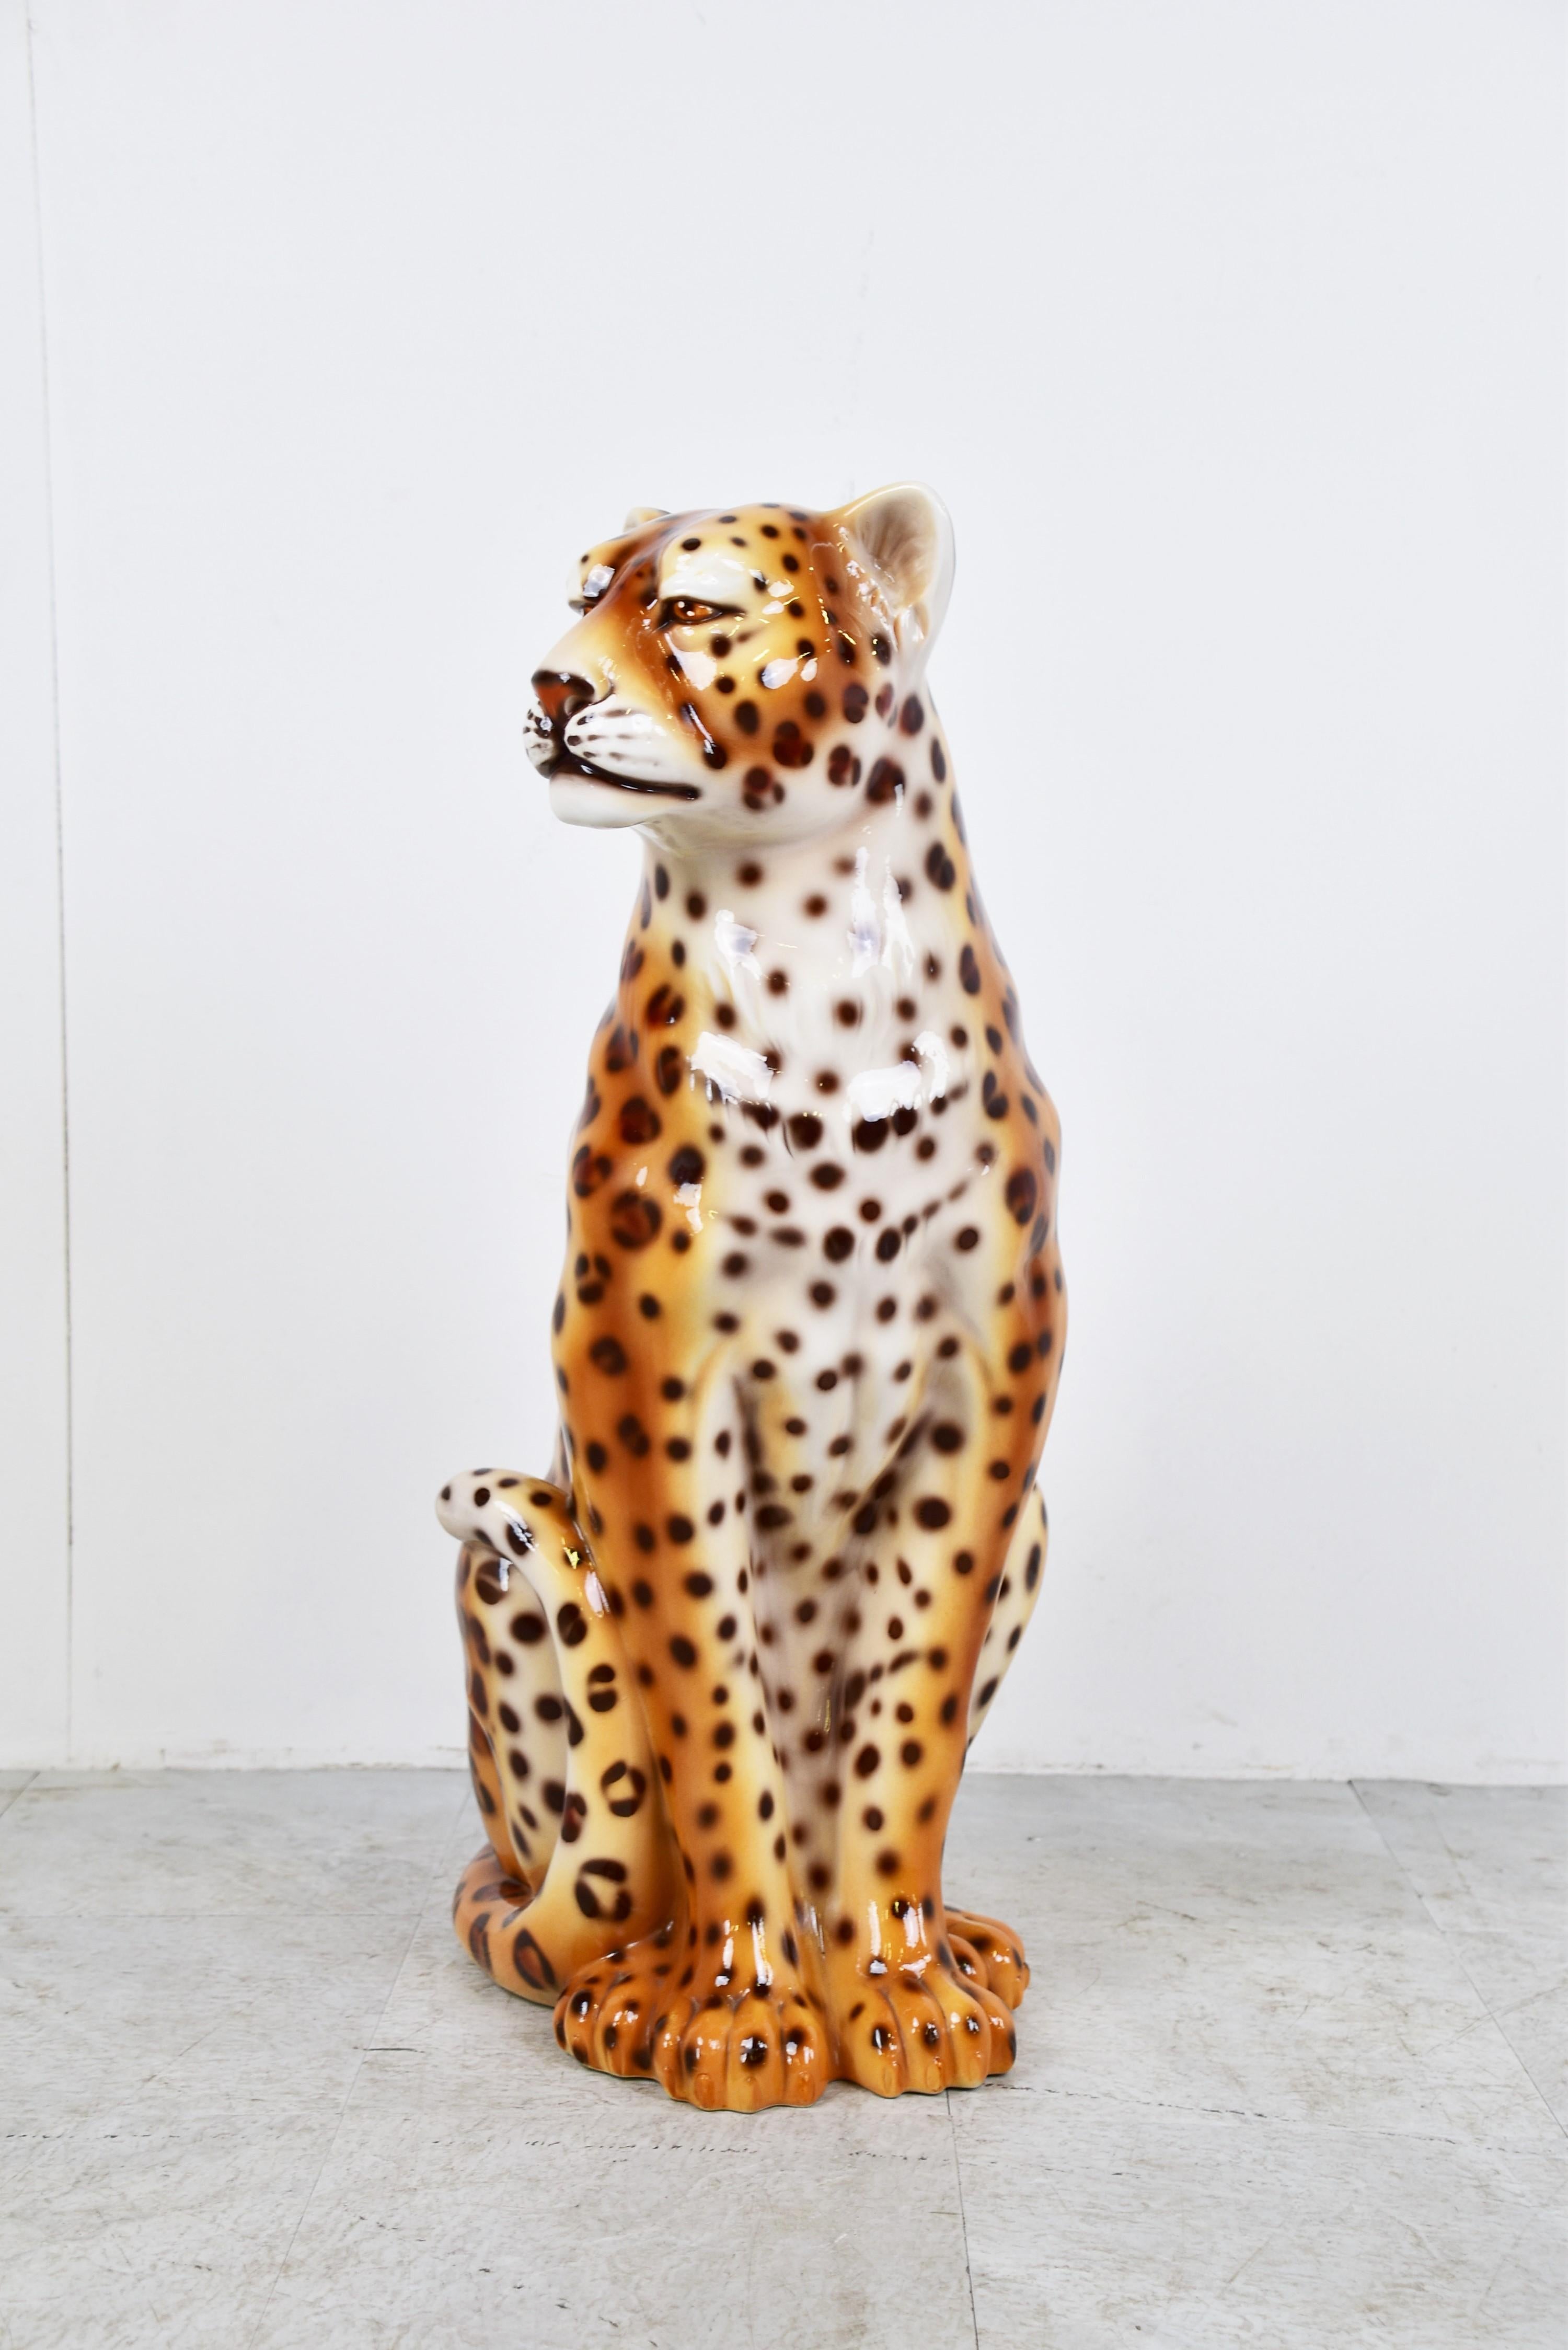 Large hand painted ceramic leopard sculpture.

Beautiful natural pose and very well sculpted leopard.

Good condition, no damage

1960's - Italy

Dimensions: 
Height: 81cm/31.88